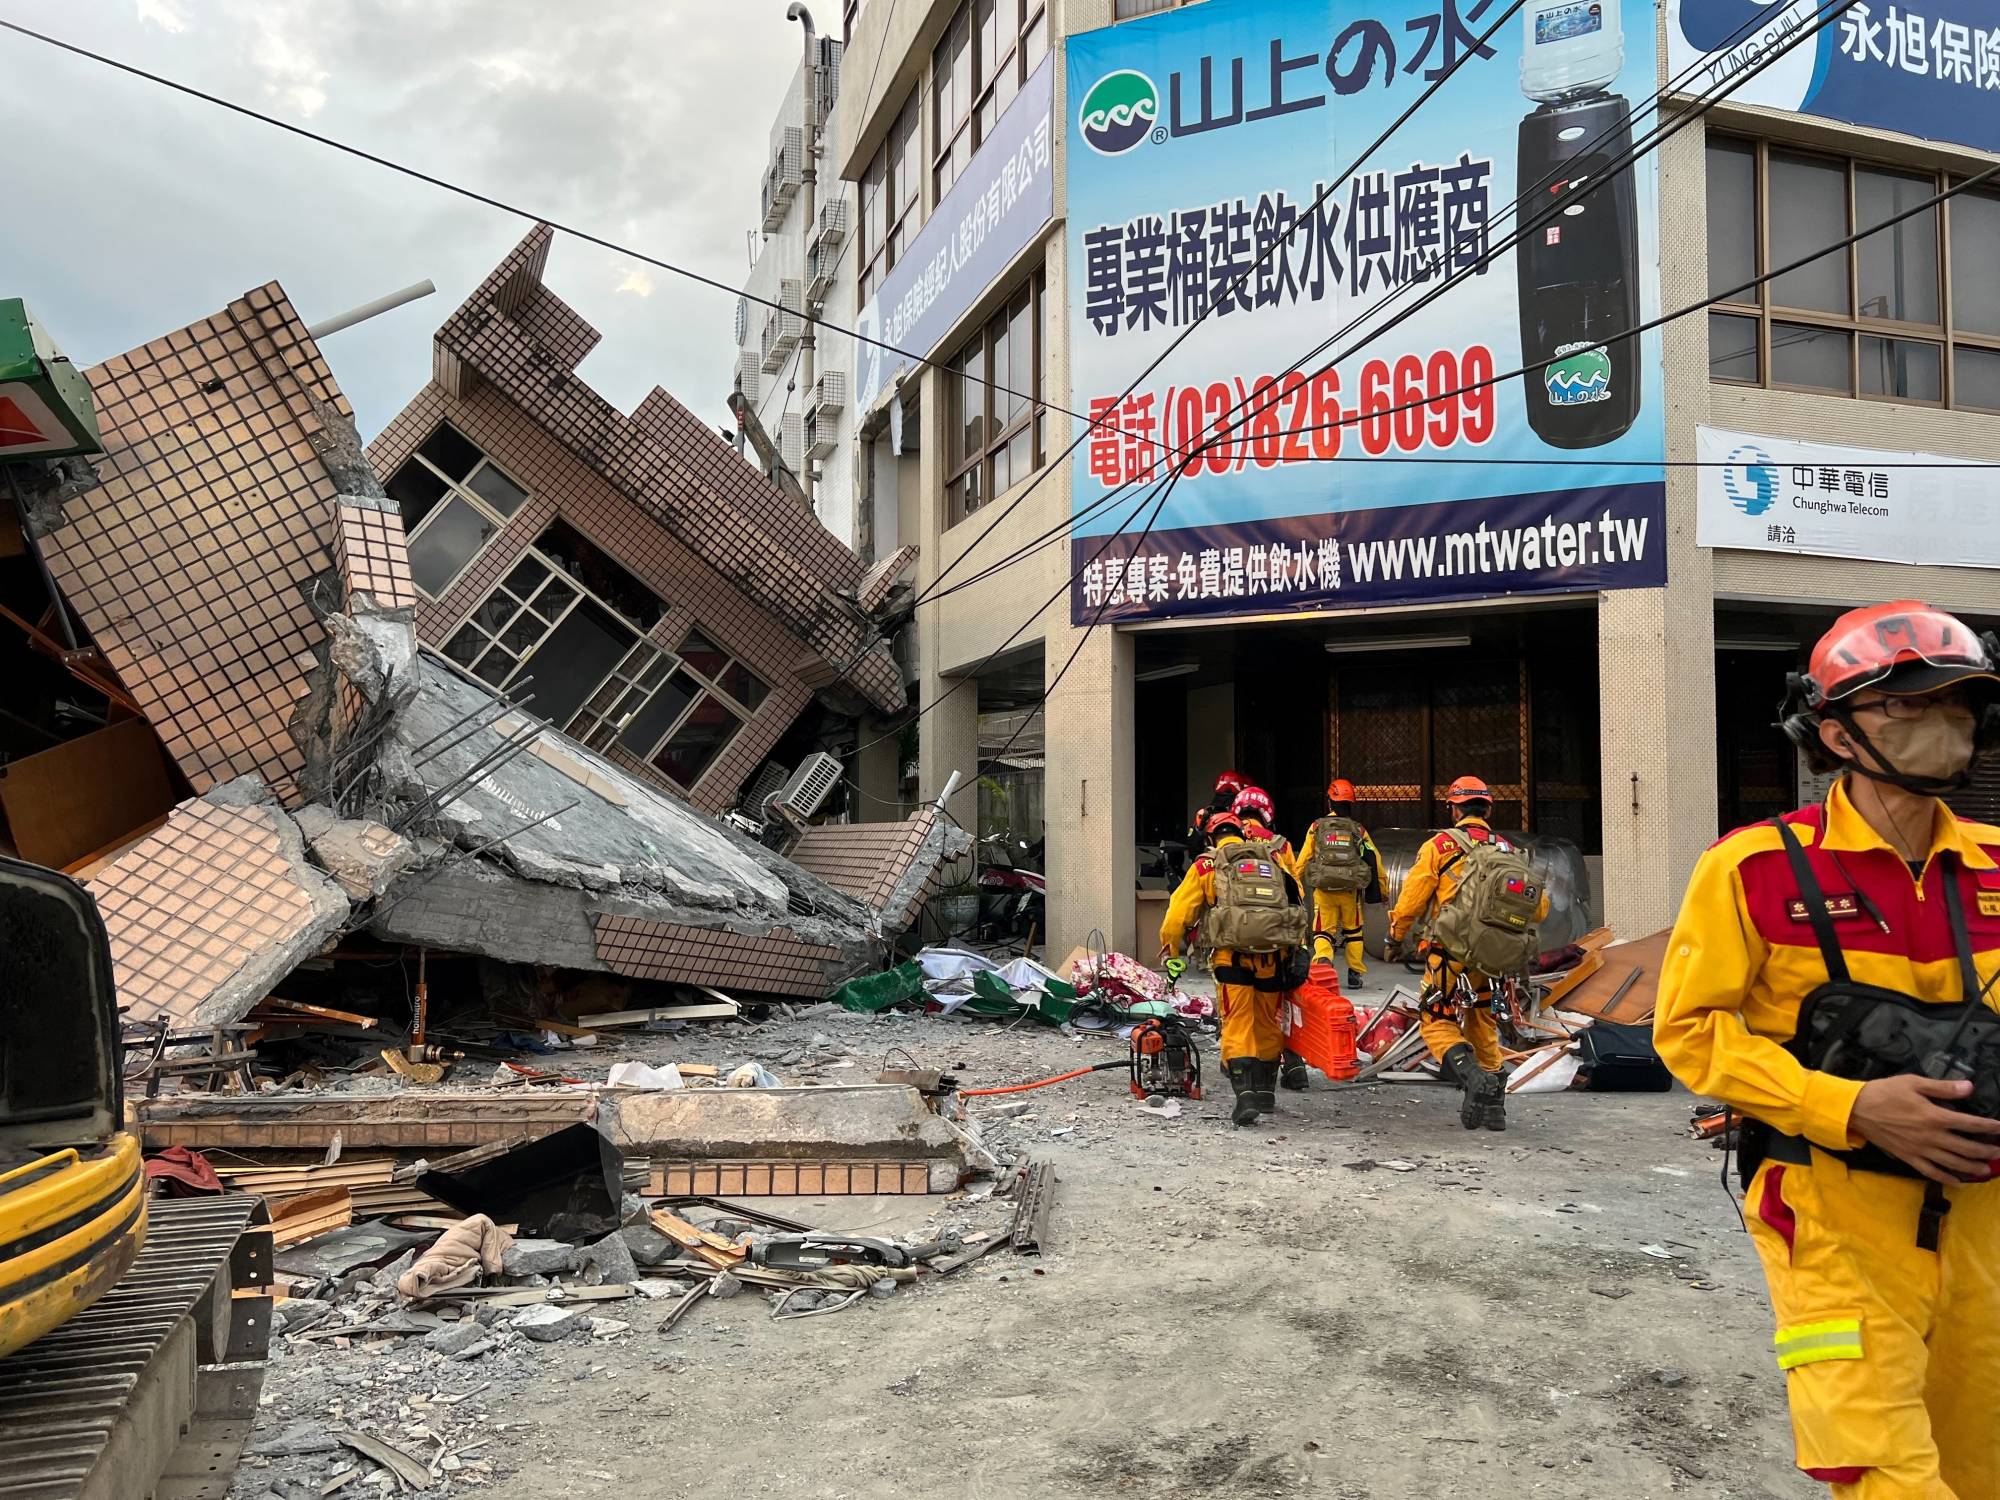 Firefighters work at the site where a building collapsed following a 6.8-magnitude earthquake, in Yuli, Taiwan, on Sunday. | TAIWAN'S 0918 EARTHQUAKE CENTRAL EMERGENCY OPERATIONS CENTER / VIA REUTERS